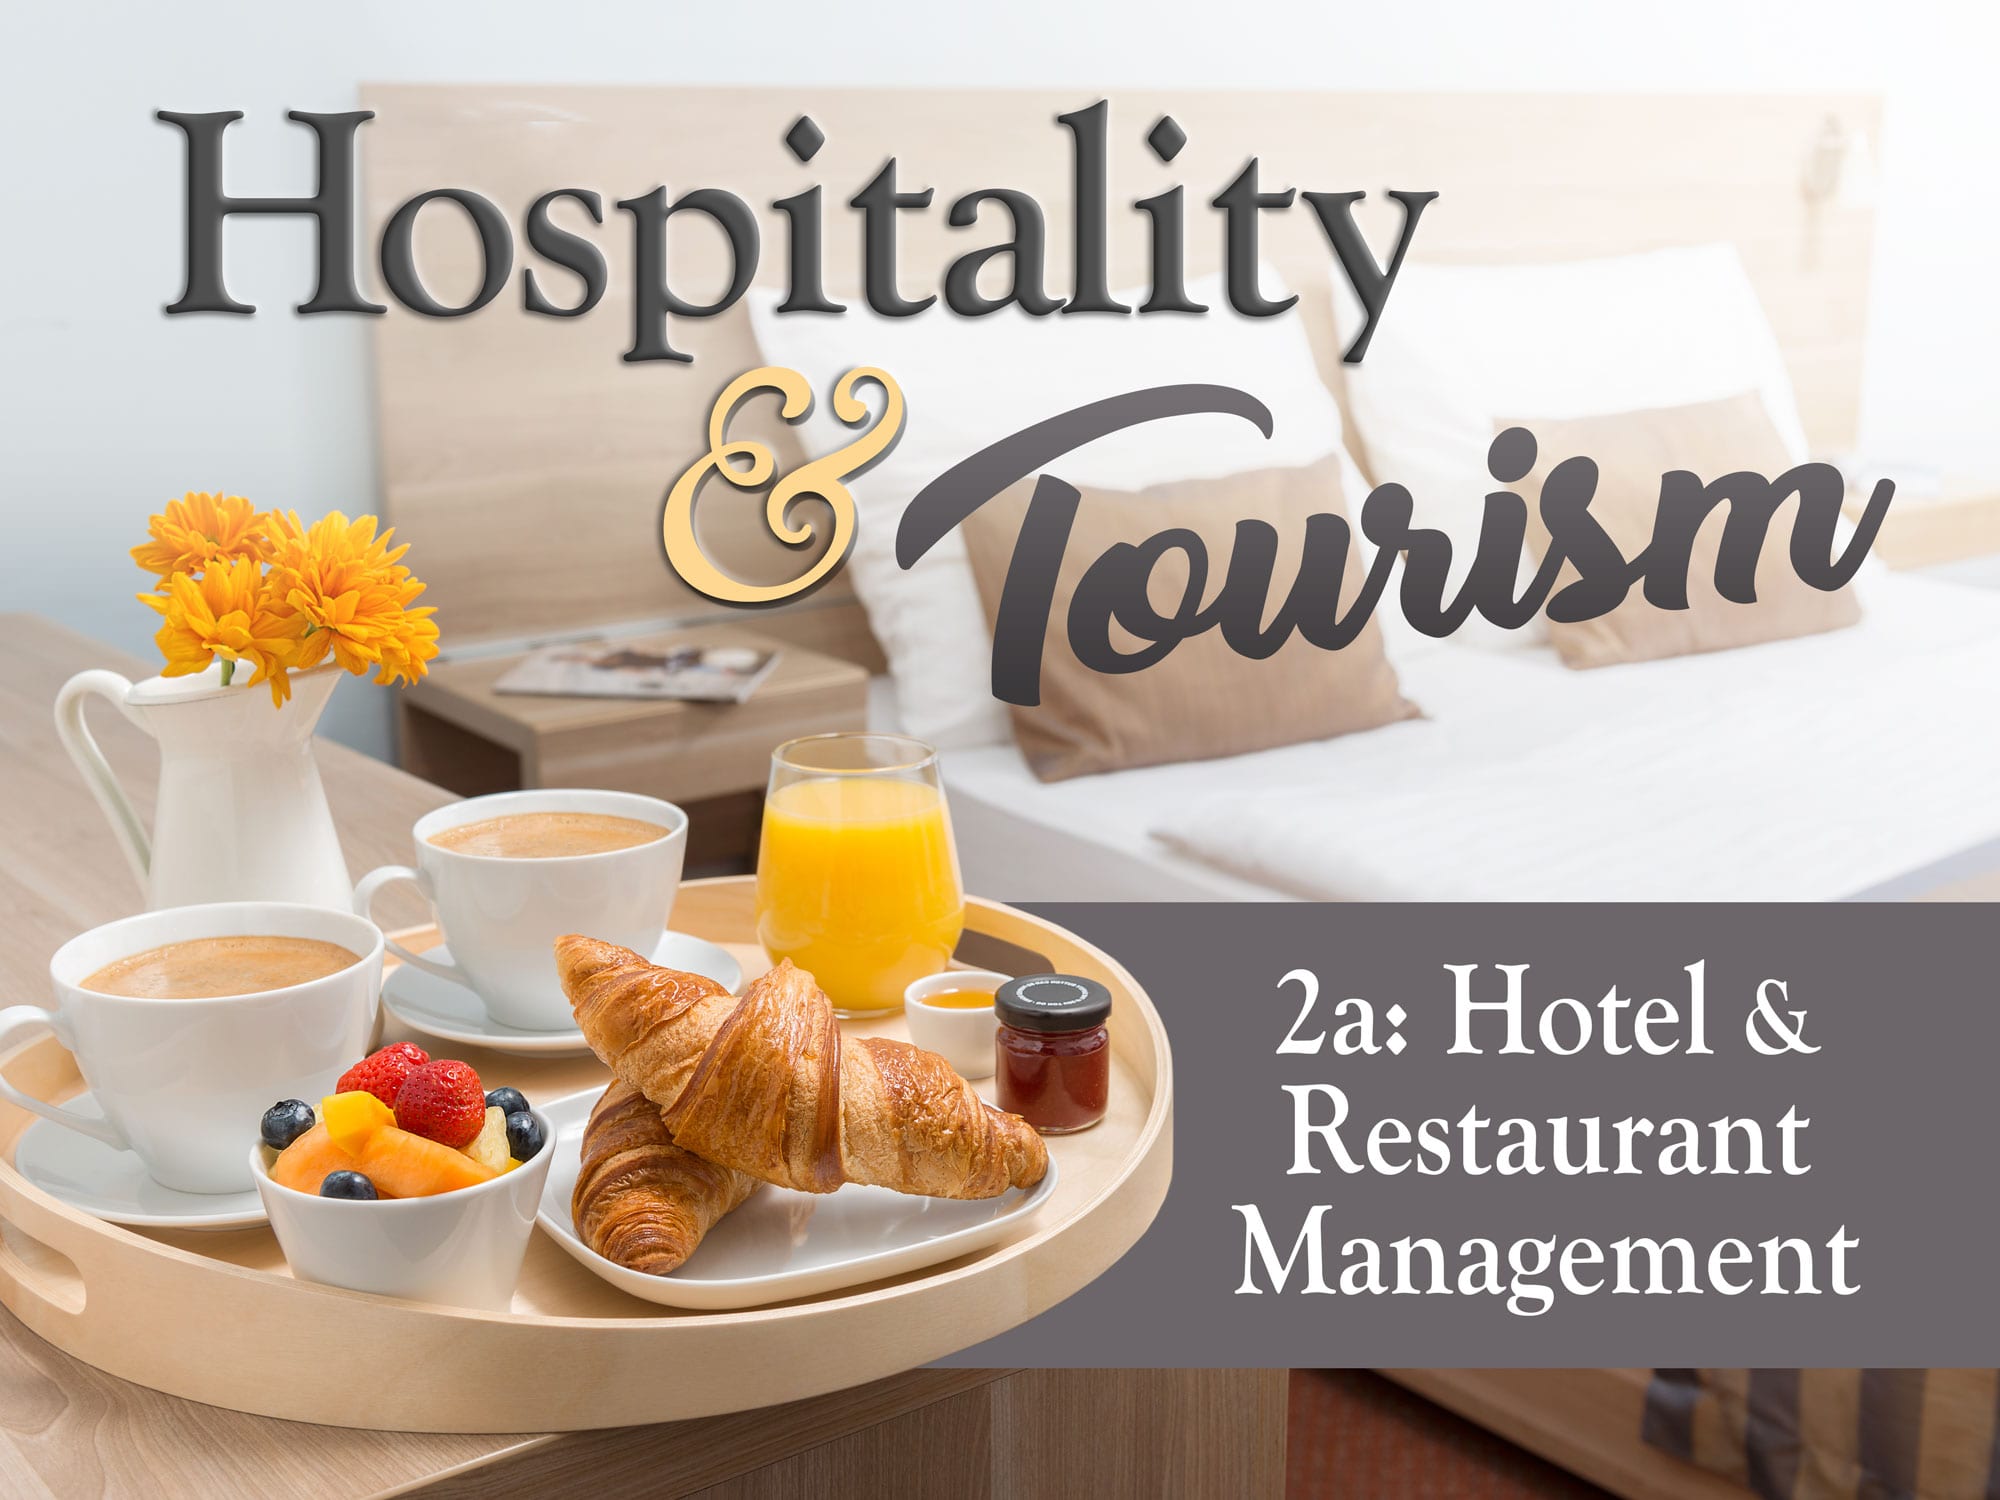 Hospitality and Tourism 2a: Hotel and Restaurant Management